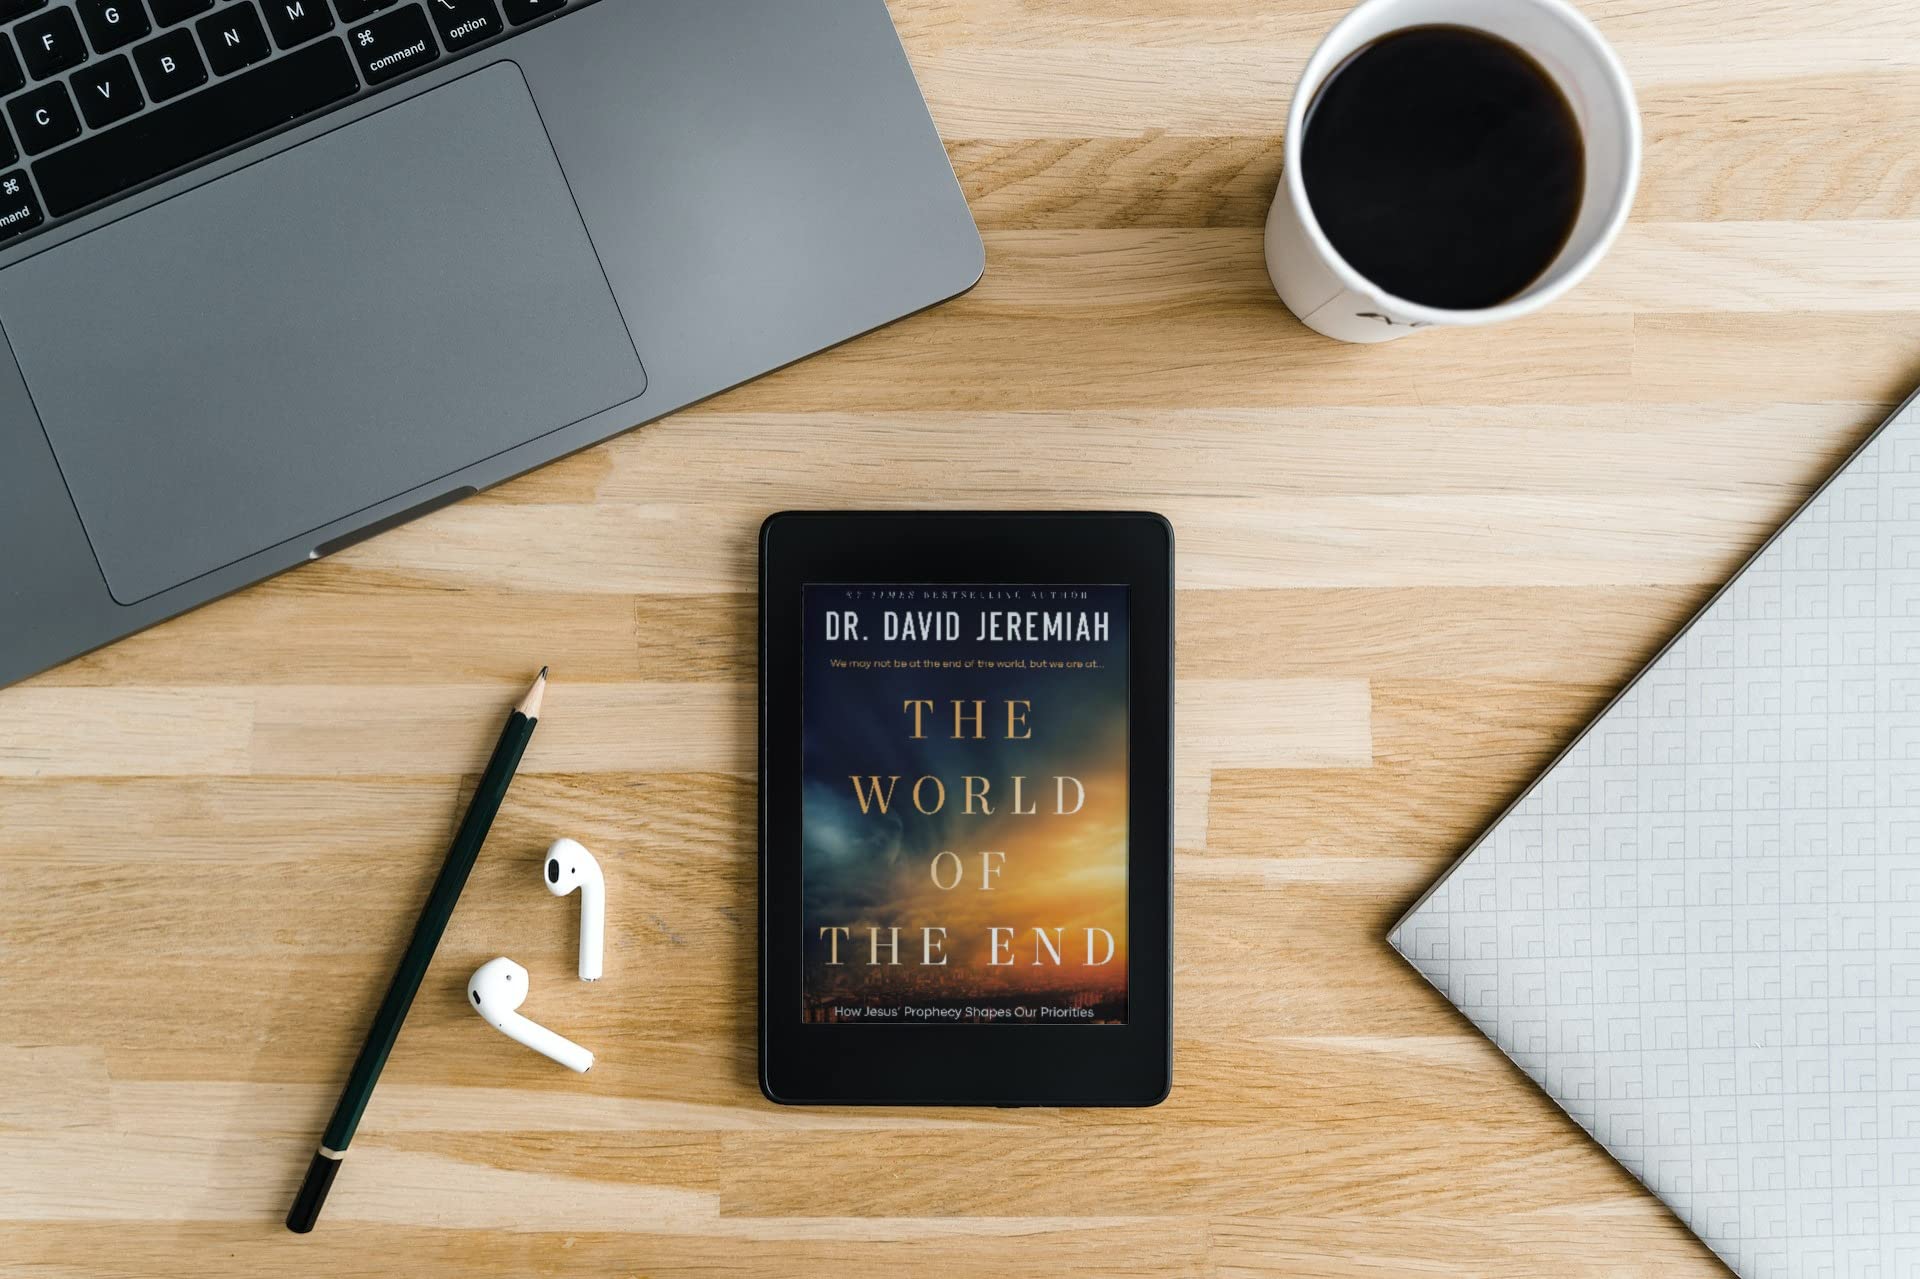 The World of the End: How Jesus' Prophecy Shapes Our Priorities